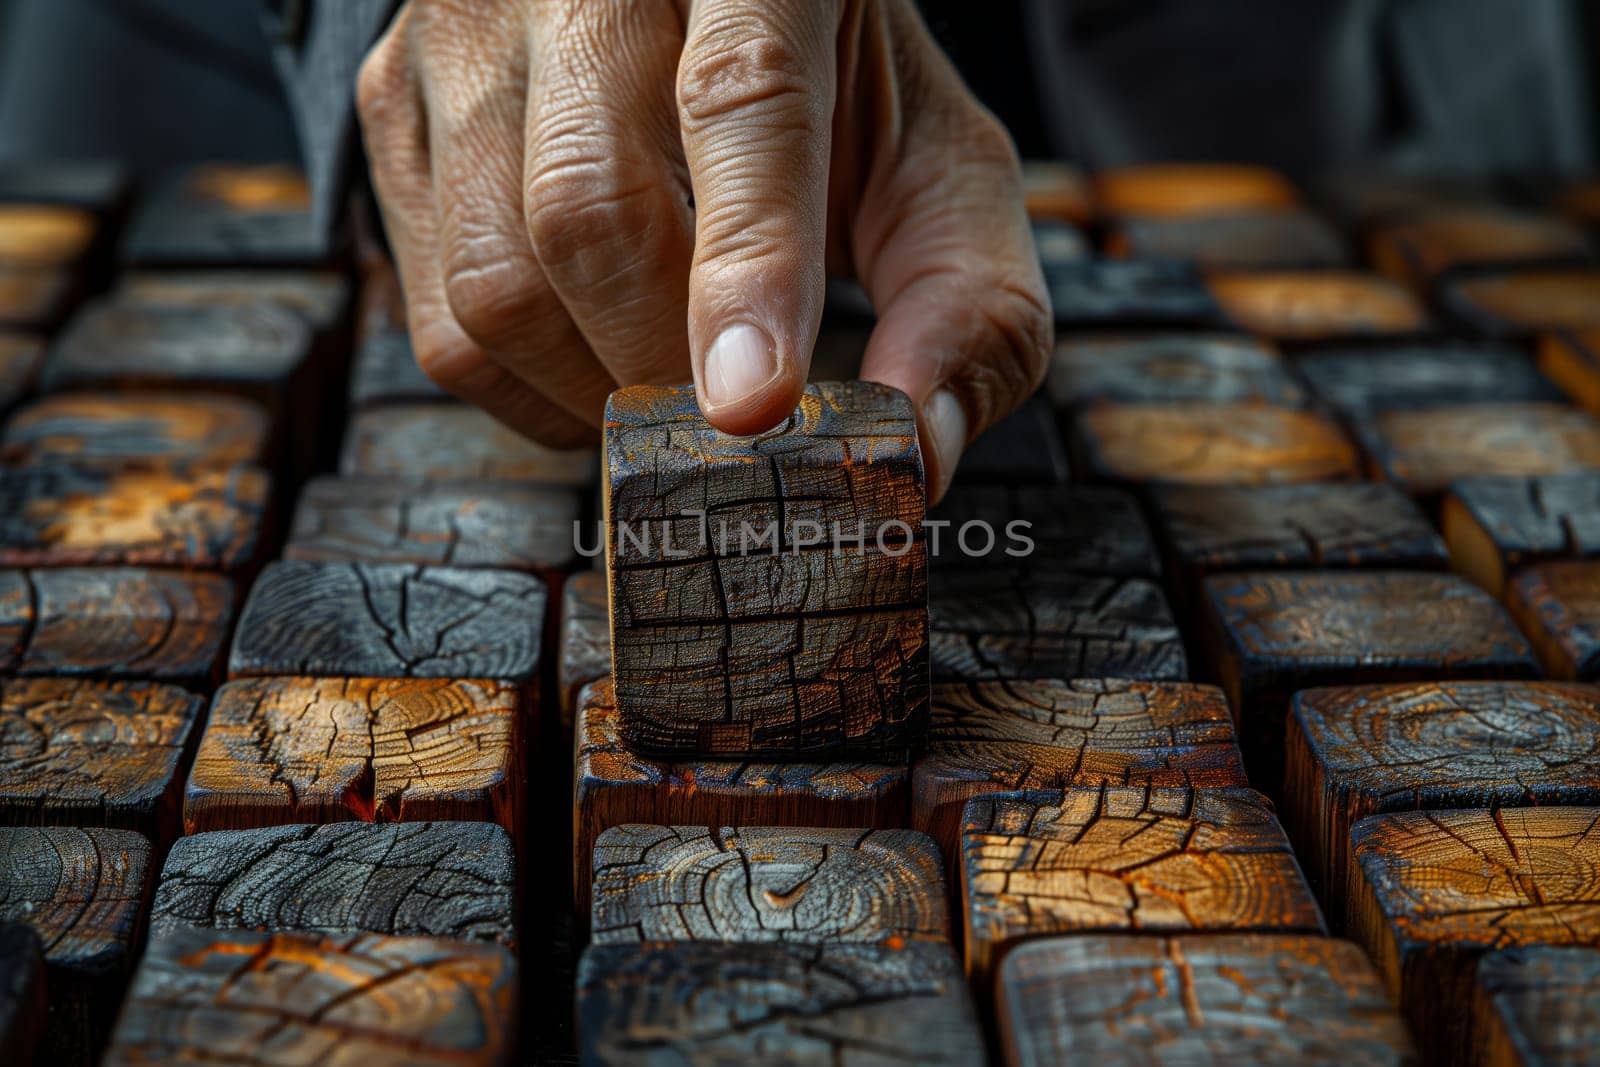 A person is playing a game of chess with wooden cubes, using their fingers to move the pieces. The wooden cubes resemble bricks used in construction